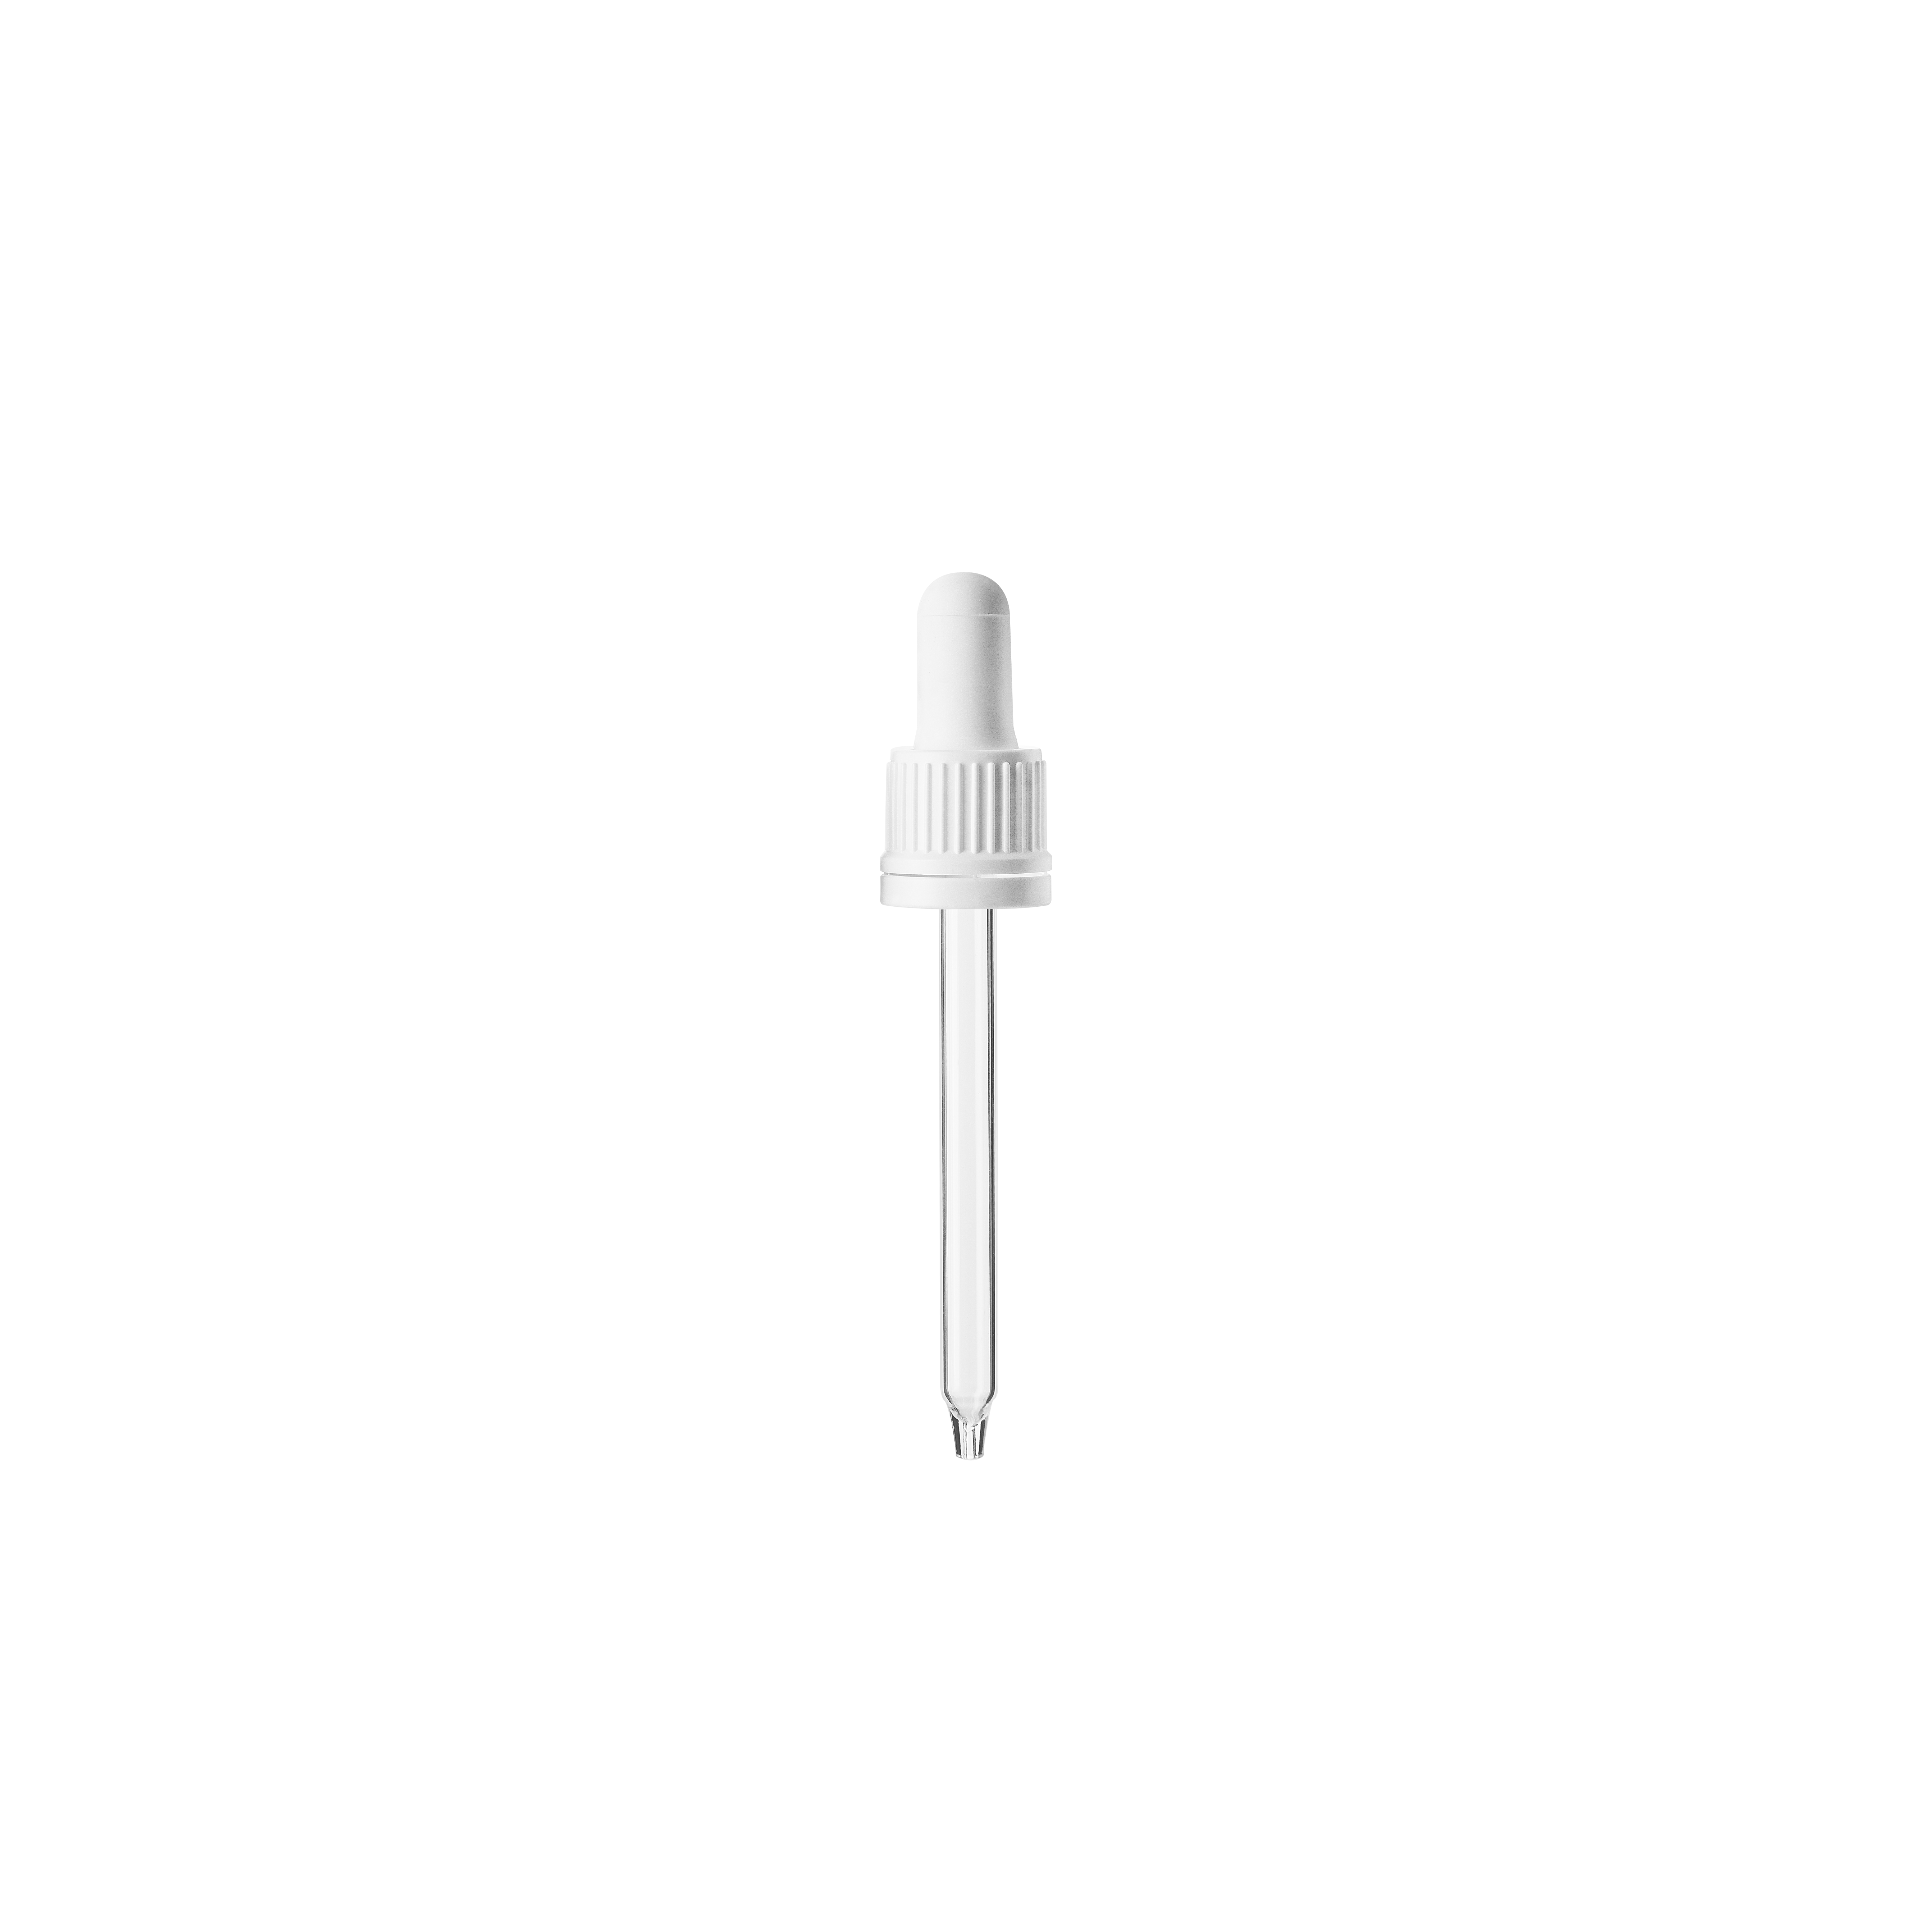 Pipette series II, DIN18, tamper-evident, PP, white, ribbed, white bulb TPE 1.0 ml, conical tip with 1.0 opening for Ginger 60 ml